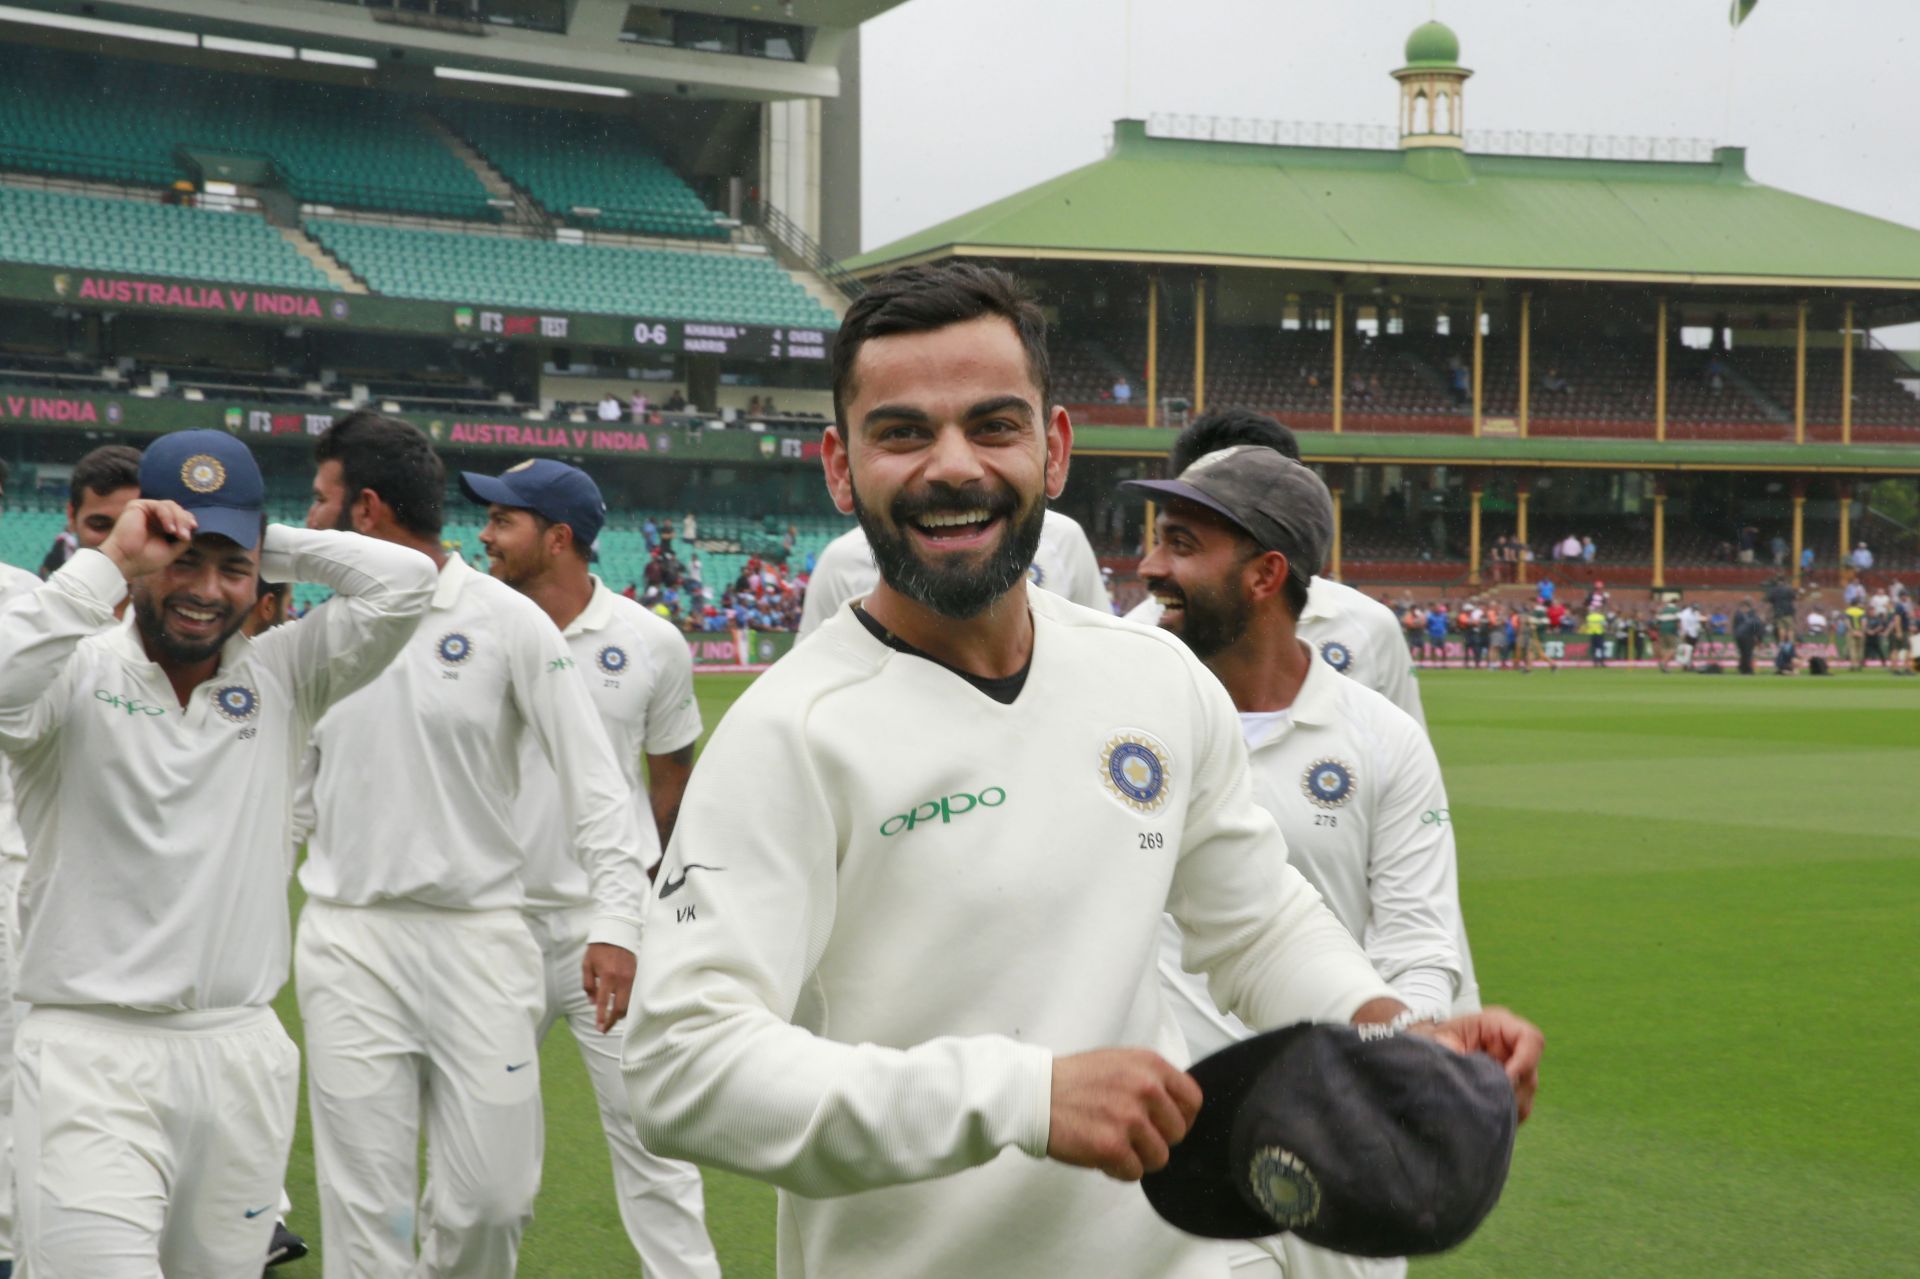 Enter caption Enter caption Virat Kohli became India&#039;s full-time Test captain during the team&#039;s tour of Australia in 2014/15. Four years later, Kohli led his team to their maiden series win in this country